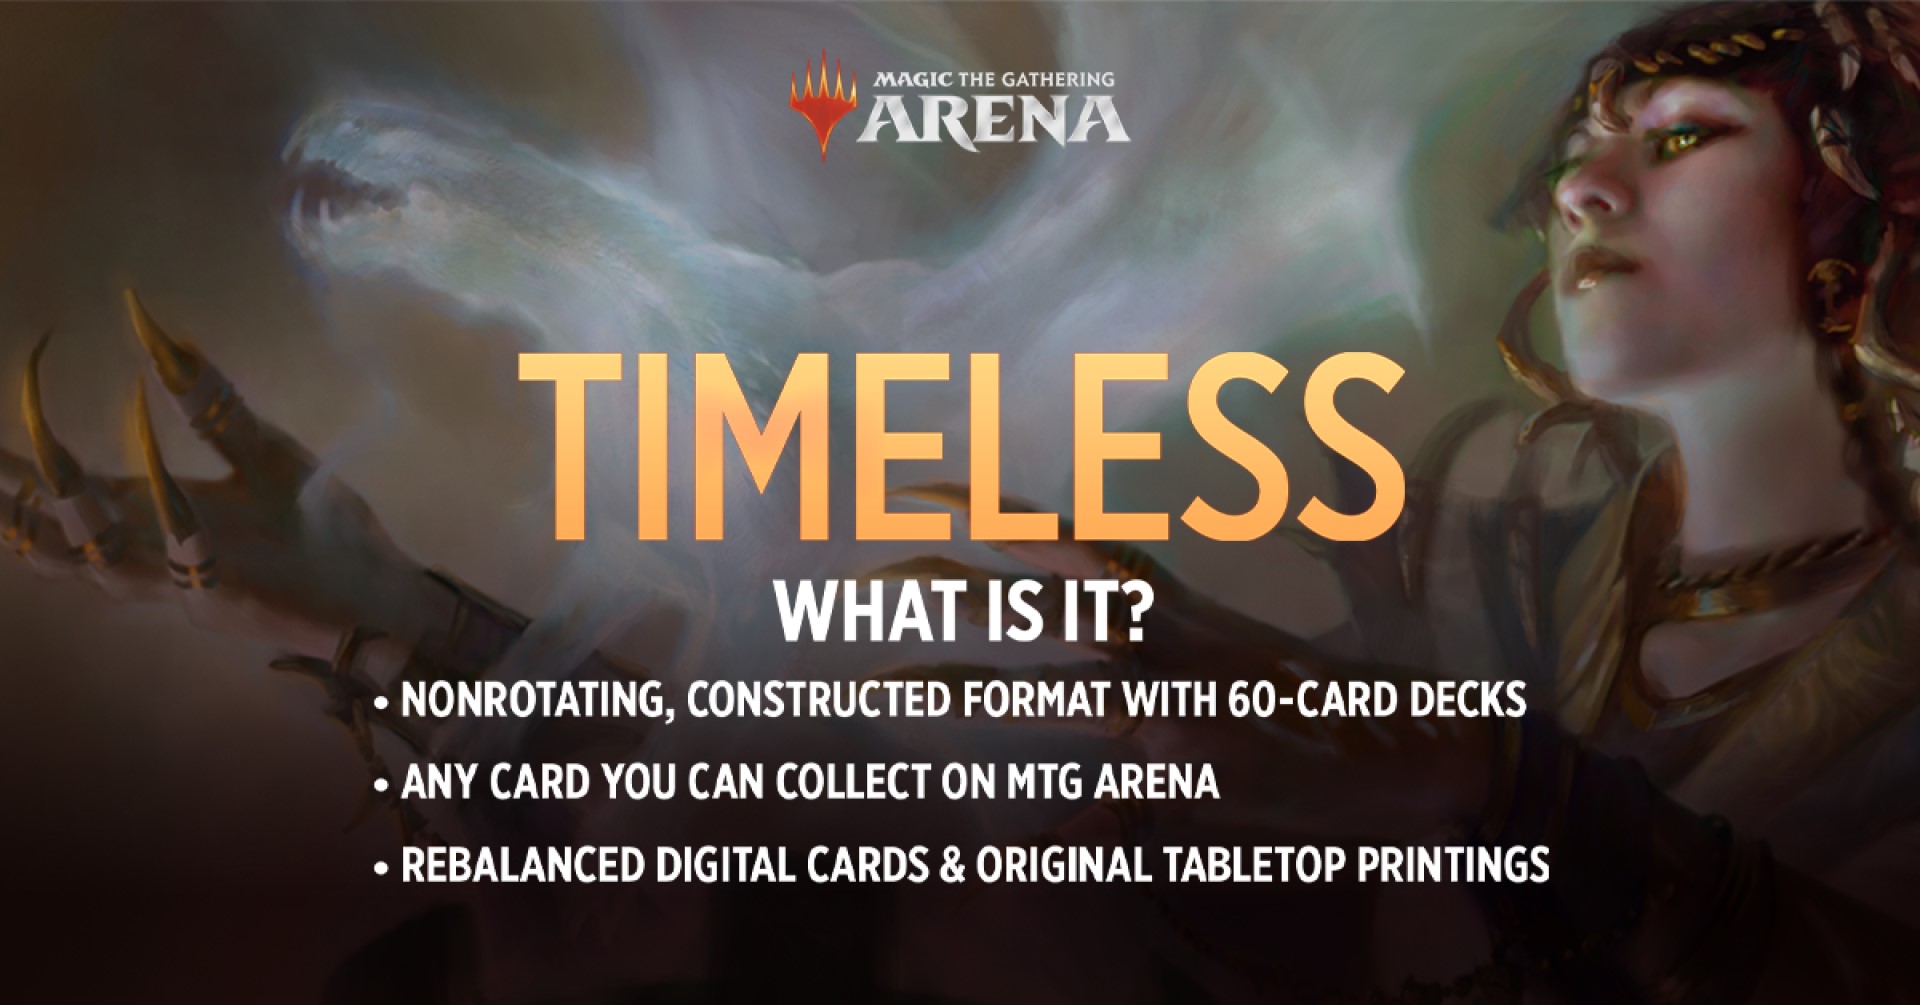 Wizards of the Coast graphic explaining the Timeless MTG Arena format